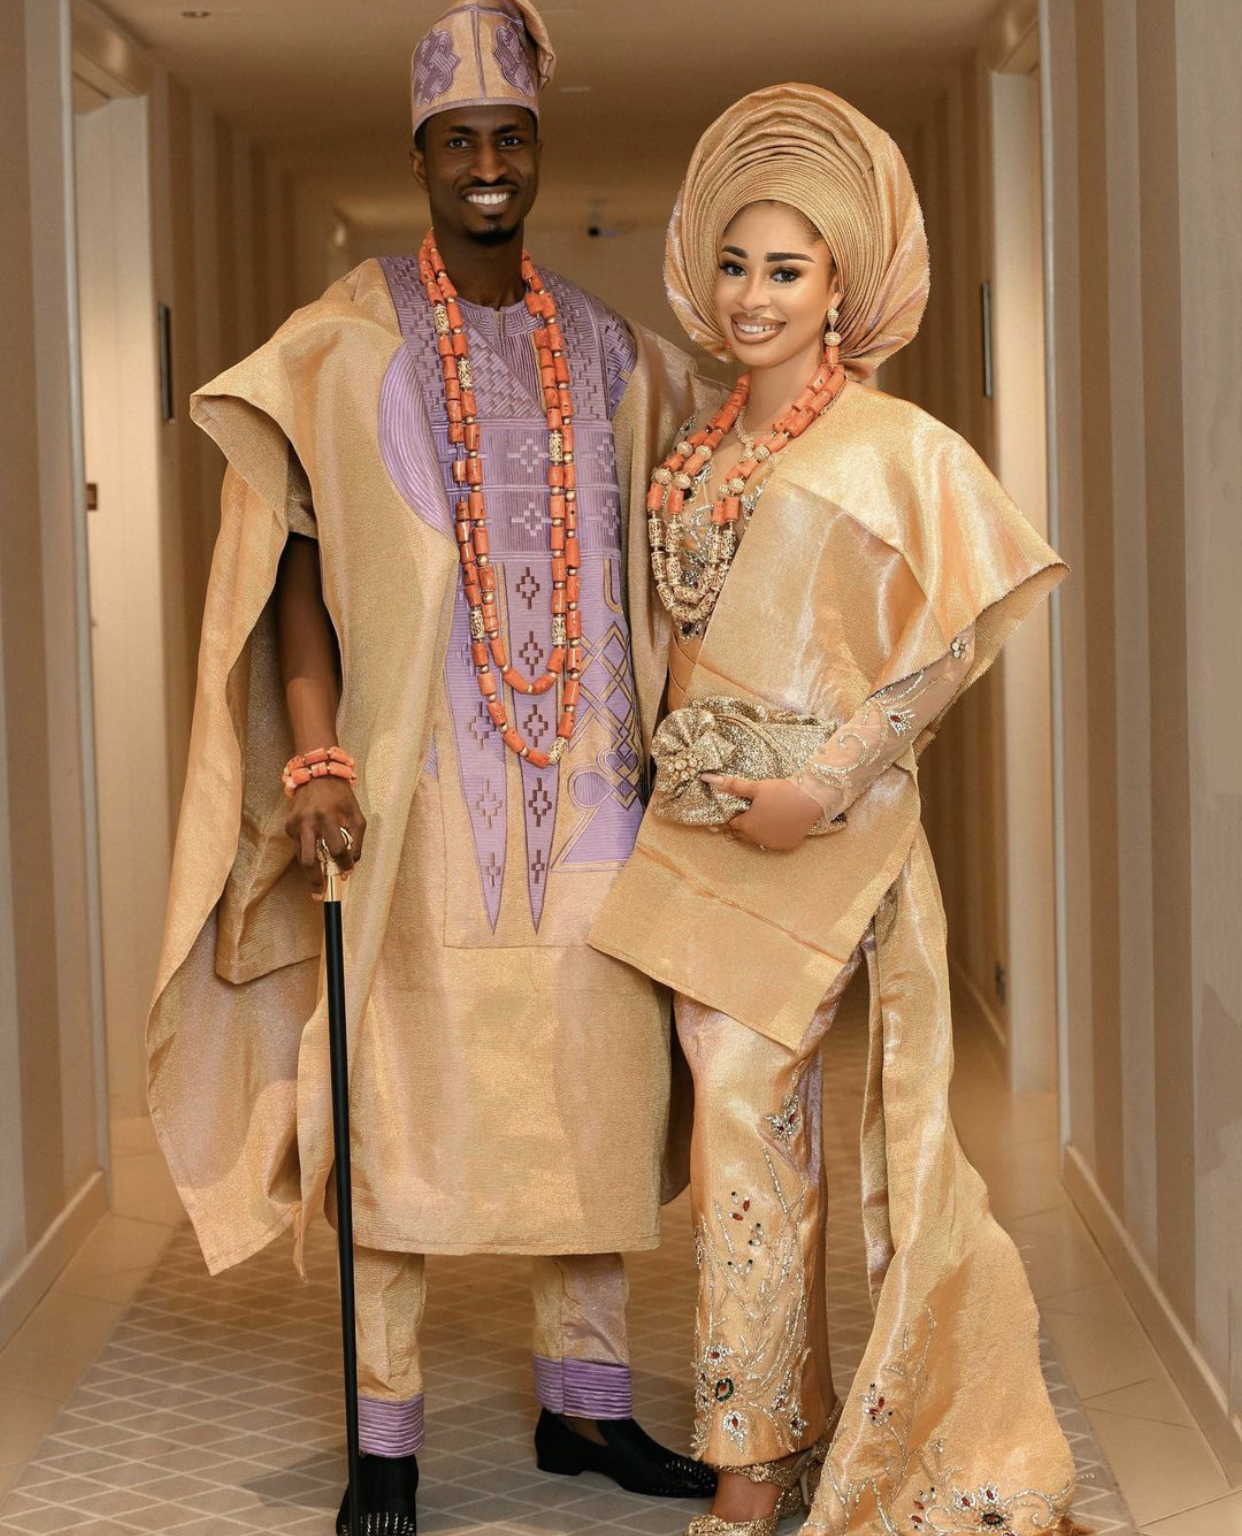 Super Eagles star Olayinka Peter marries Nollywood actress Yetunde Barnabas